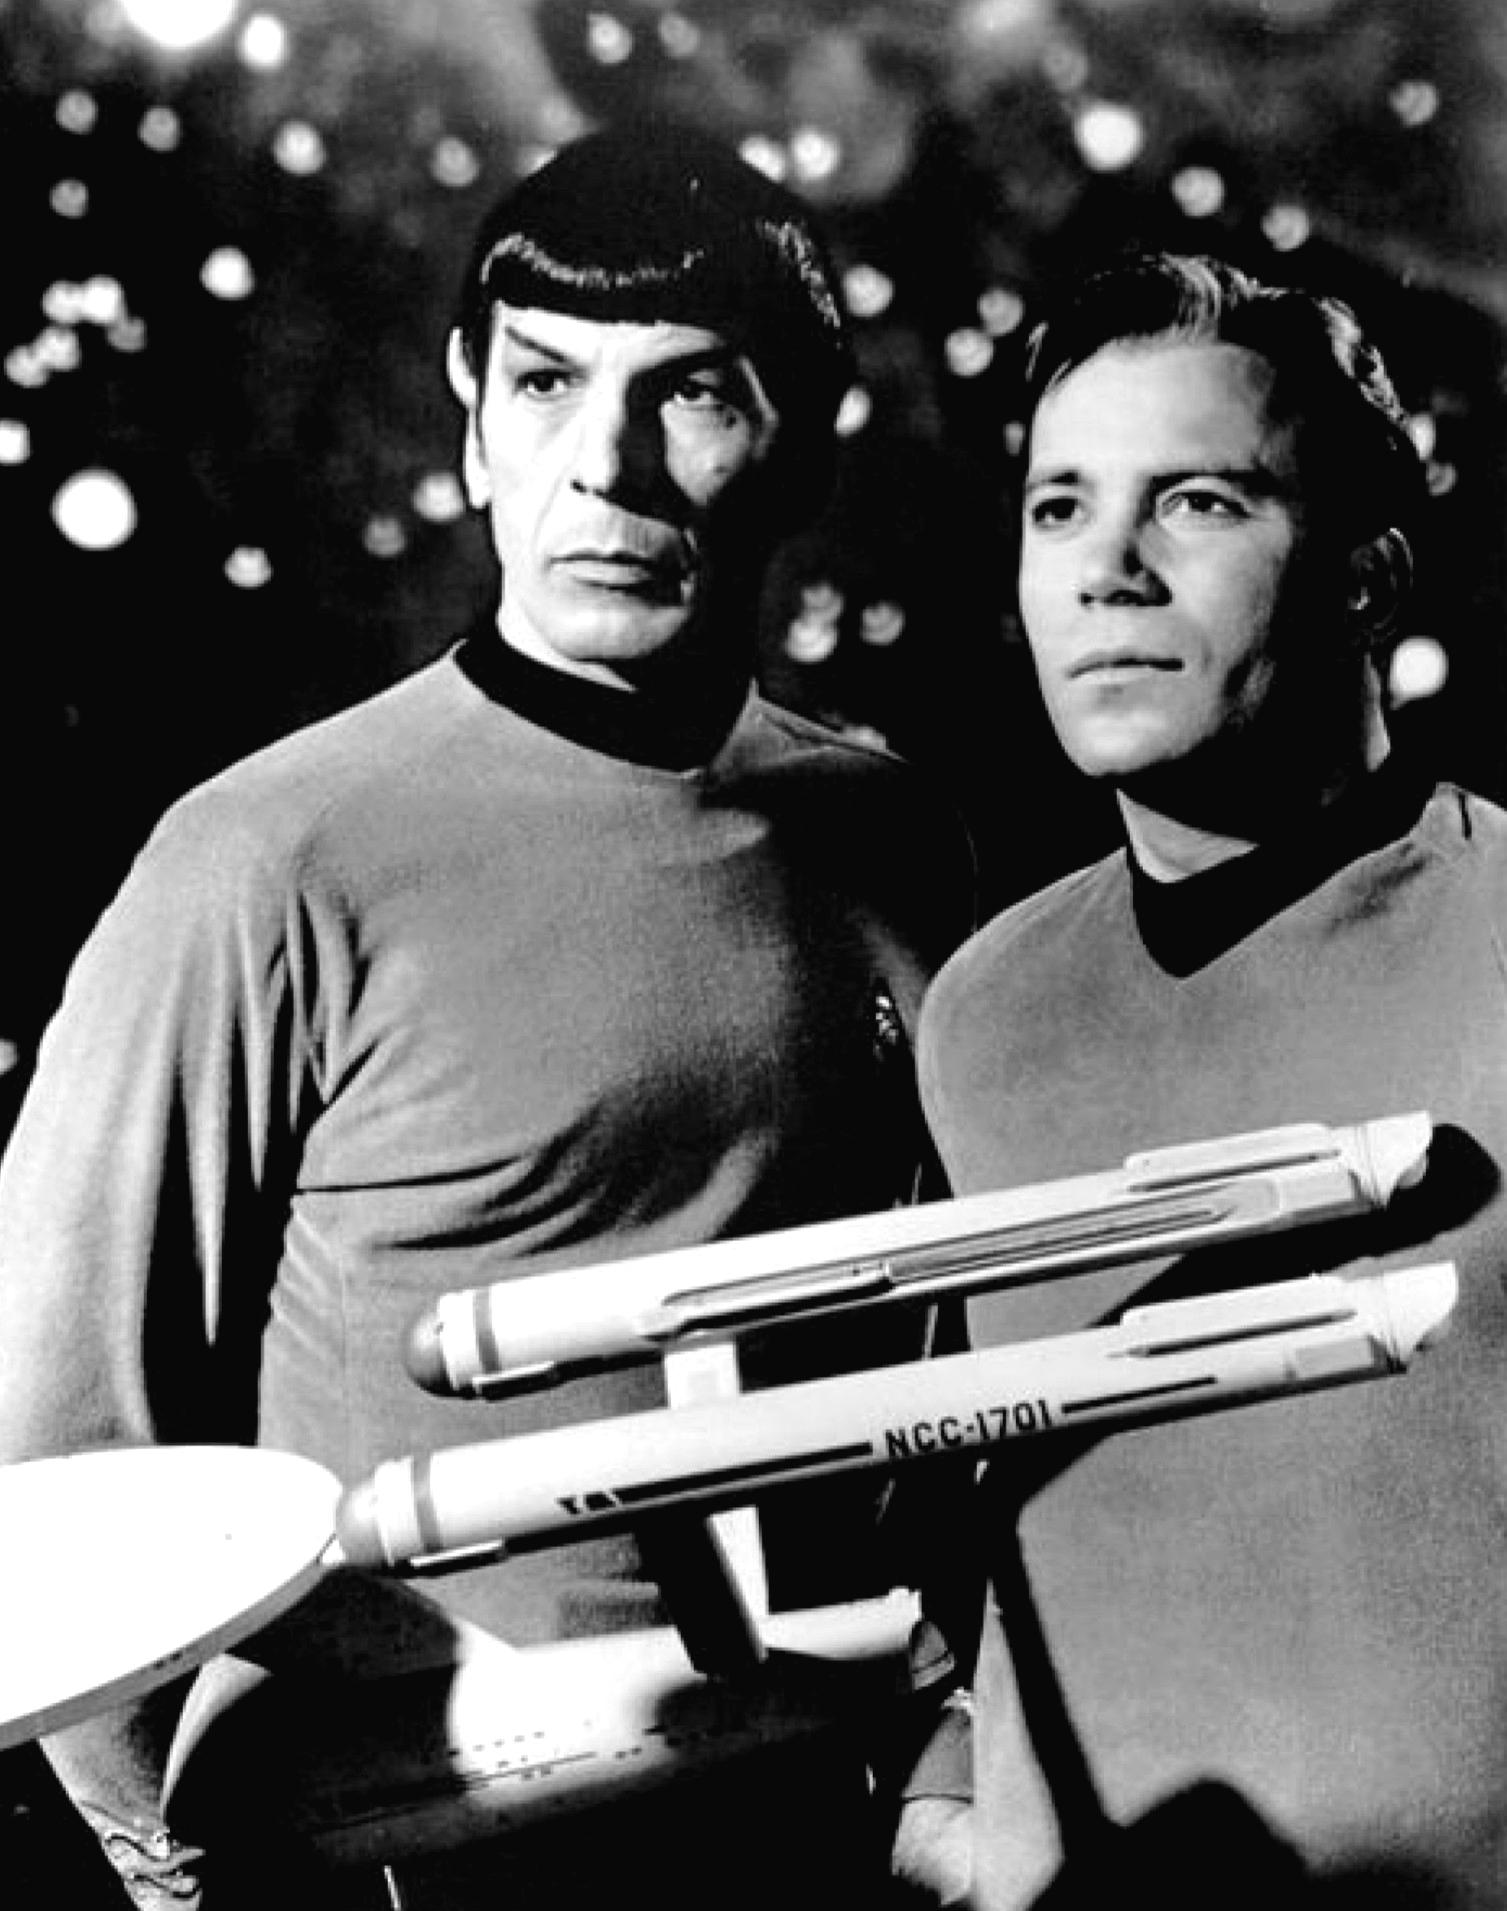 An image of Leonard Nimoy and Willian Shatner standing side by side as Spock and Kirk from the Star Trek series. A model of the star ship Enterprise is in the foreground.